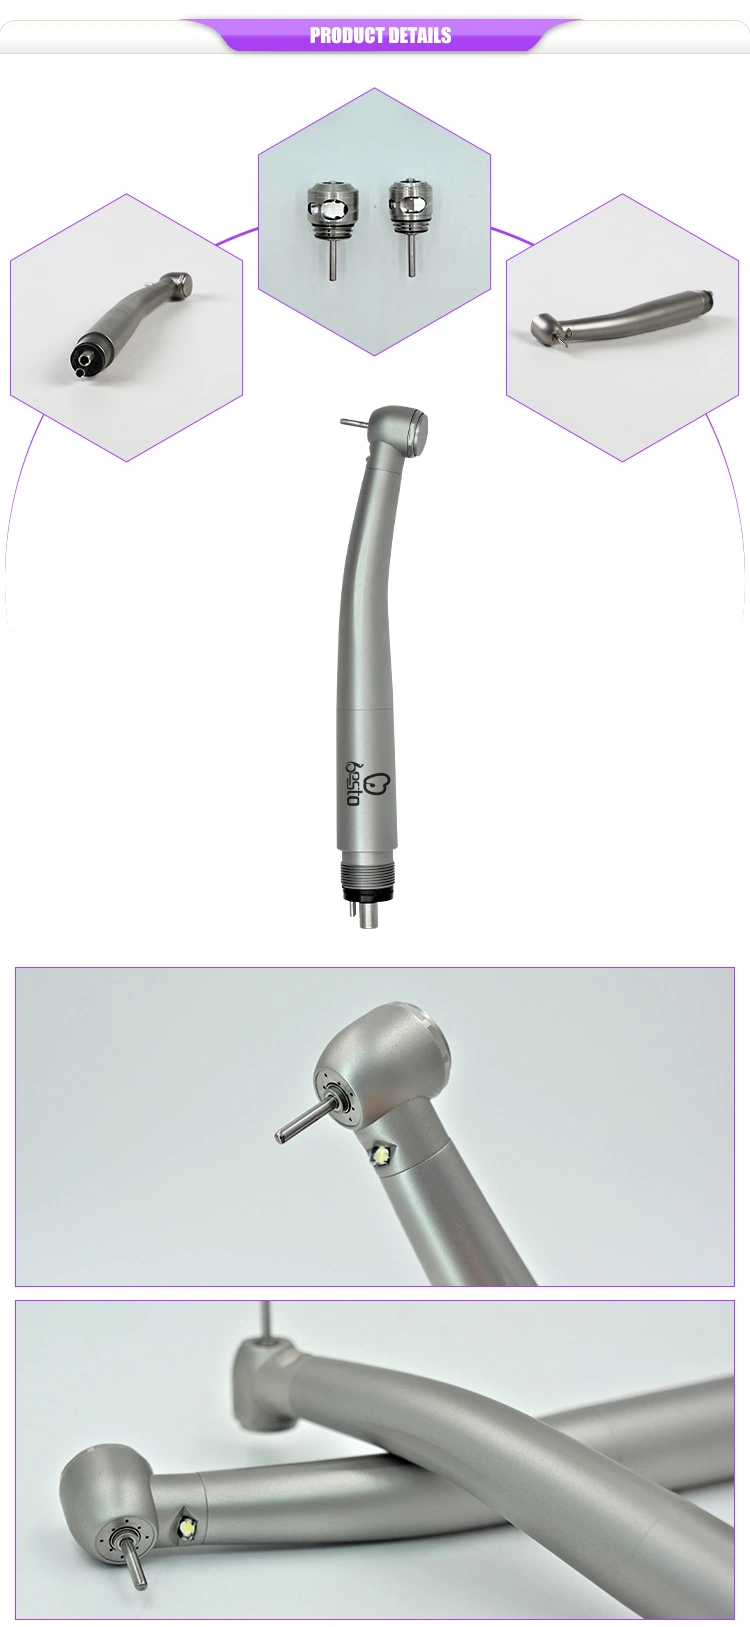 High Speed LED E-Generator Dental Handpiece Stainless Steel Body NSK M500LG Dynaled Good Quality 4 Water Spray Portable Turbine Push Button